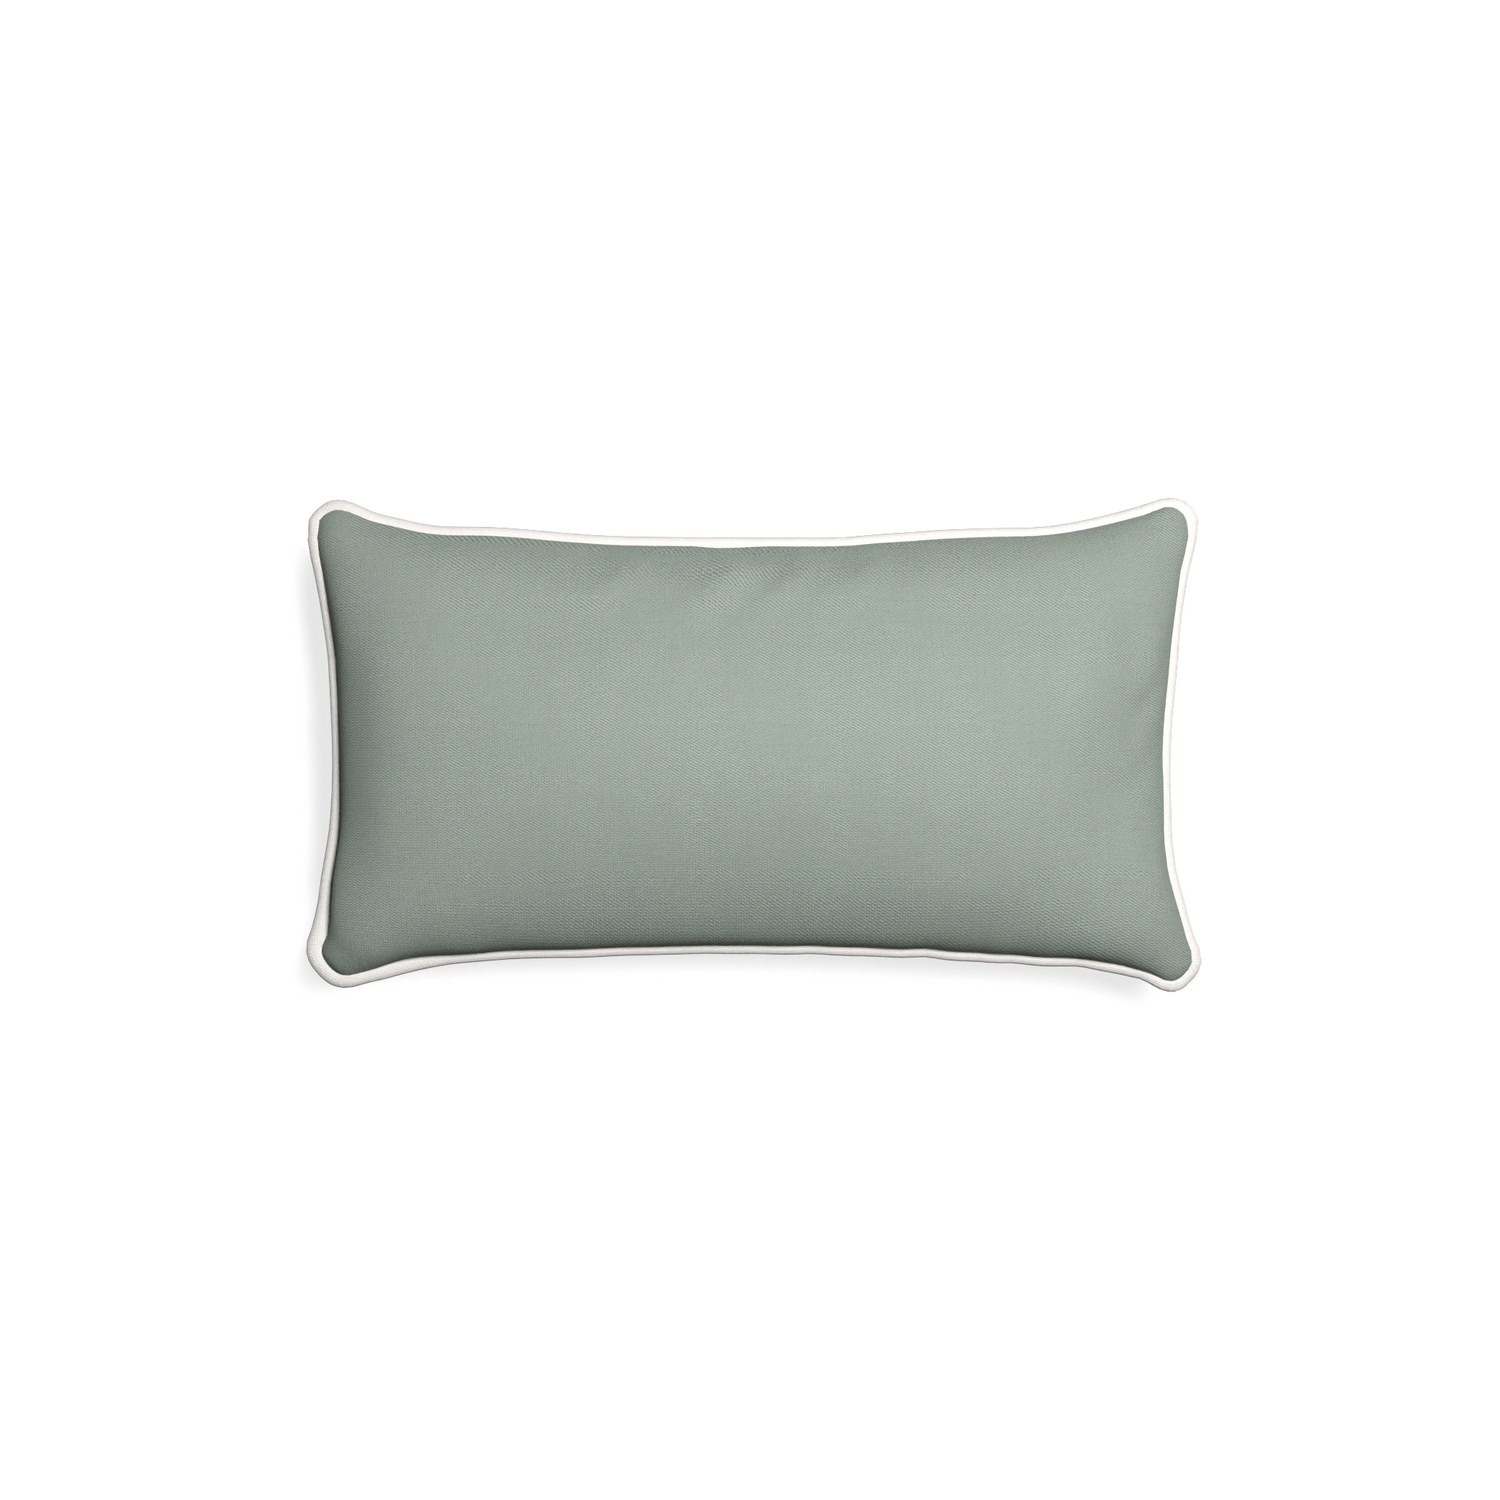 Petite-lumbar sage custom sage green cottonpillow with snow piping on white background